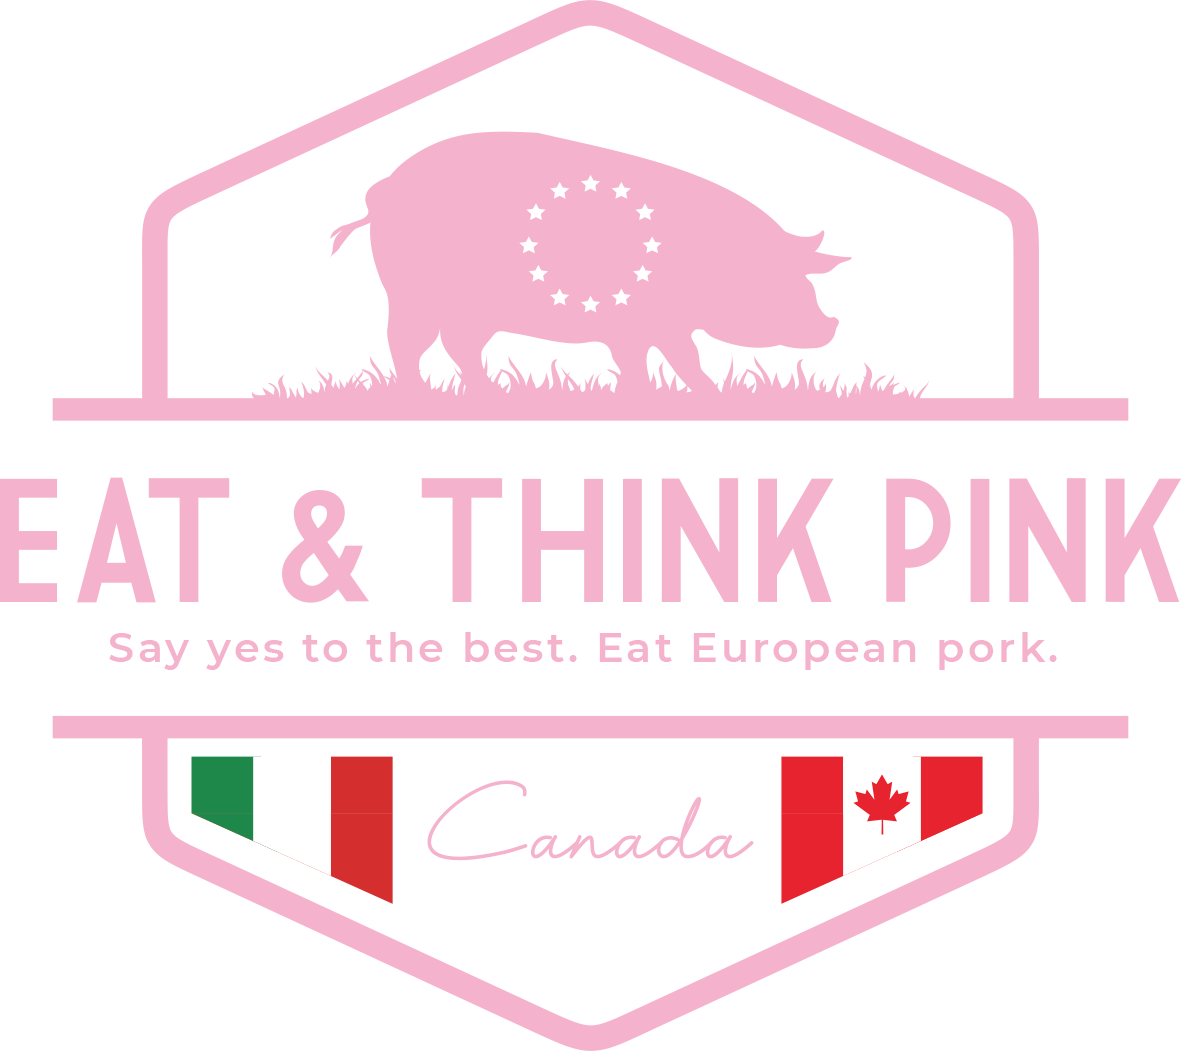  EAT&THINK PINK CANADA